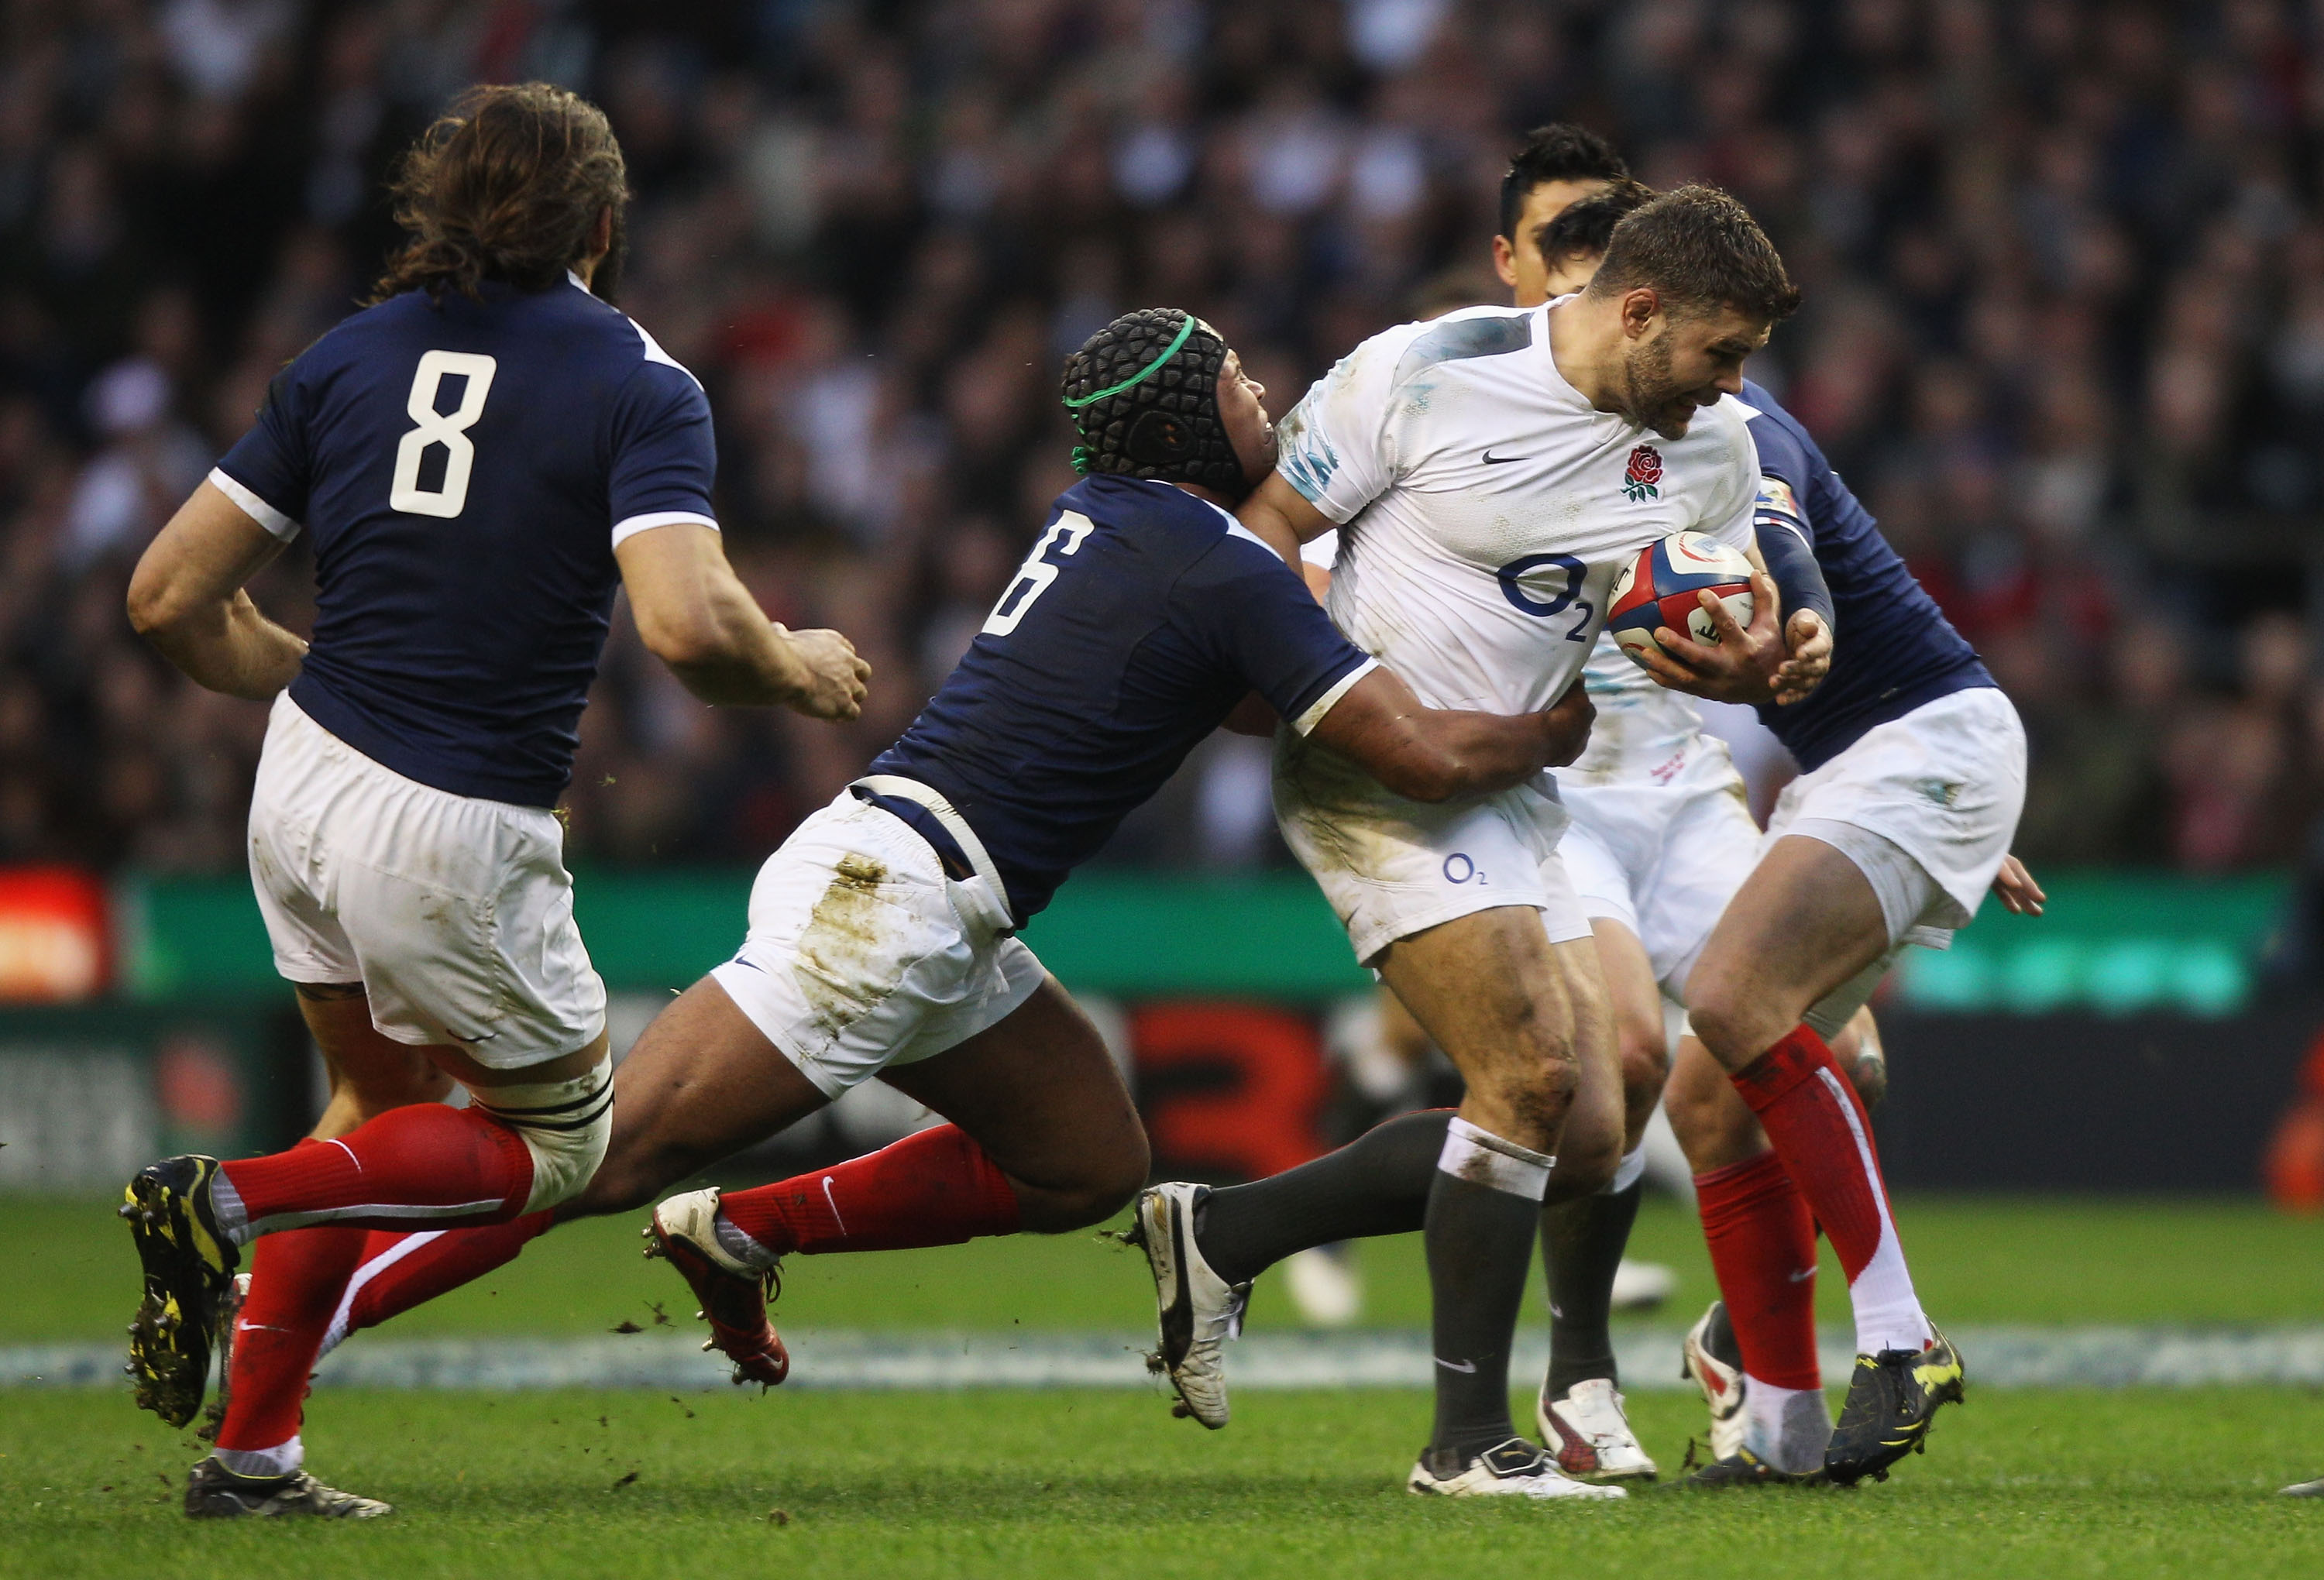 LONDON, ENGLAND - FEBRUARY 26:  Nick Easter of England tries to breakthrough the French defence during the RBS 6 Nations Championship match between England and France at Twickenham Stadium on February 26, 2011 in London, England.  (Photo by David Rogers/G